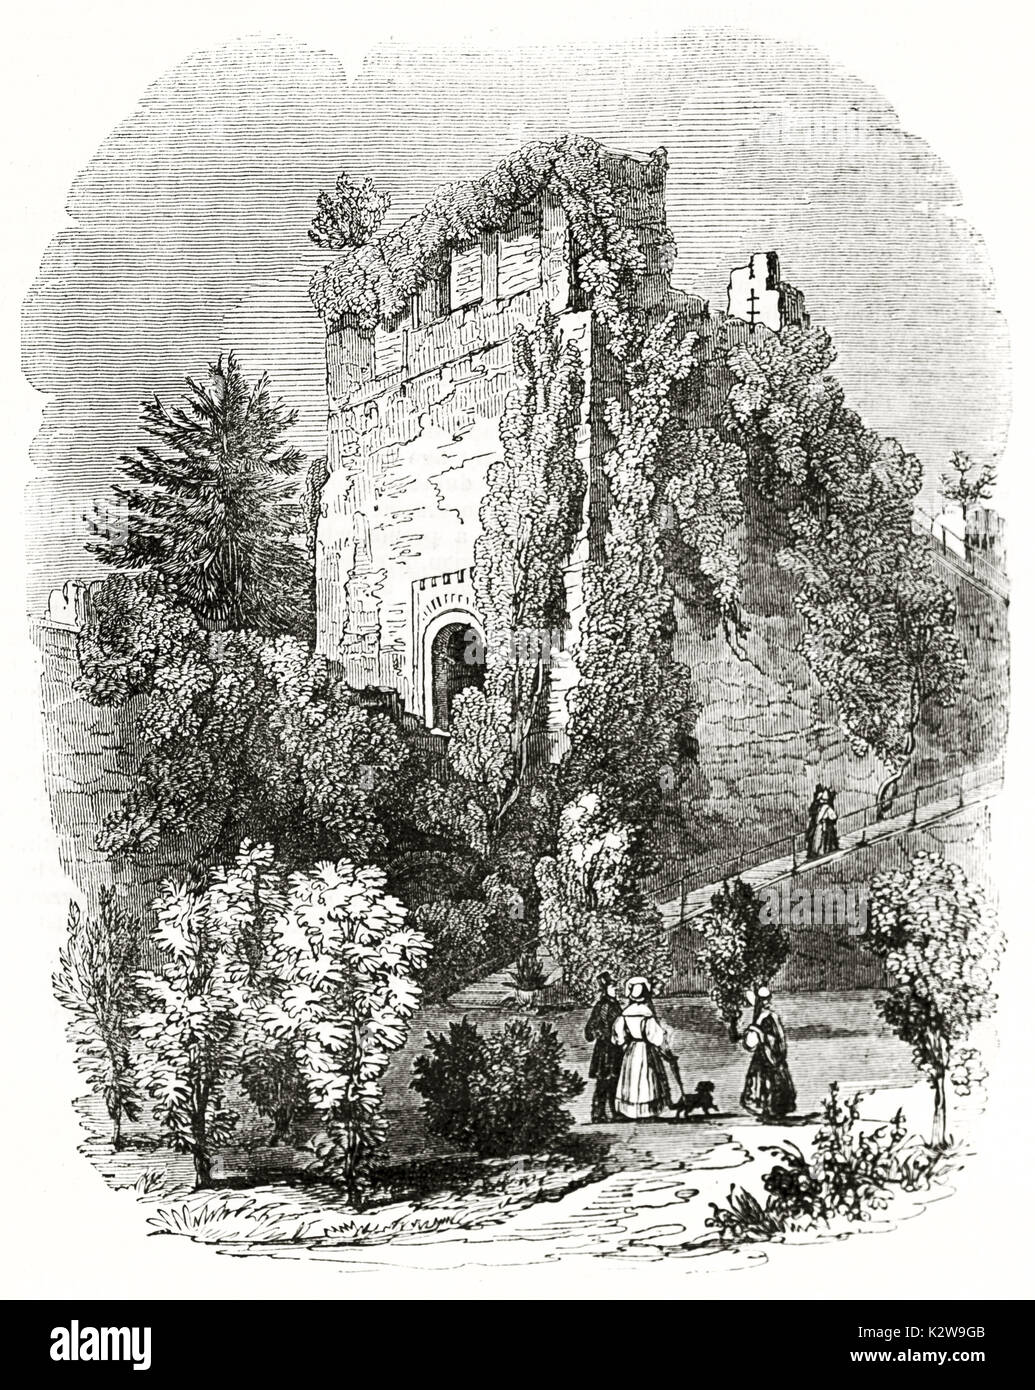 Old view of Farnham castle ruins, England. By unidentified author, published on  Penny Magazine, London, 1835 Stock Photo